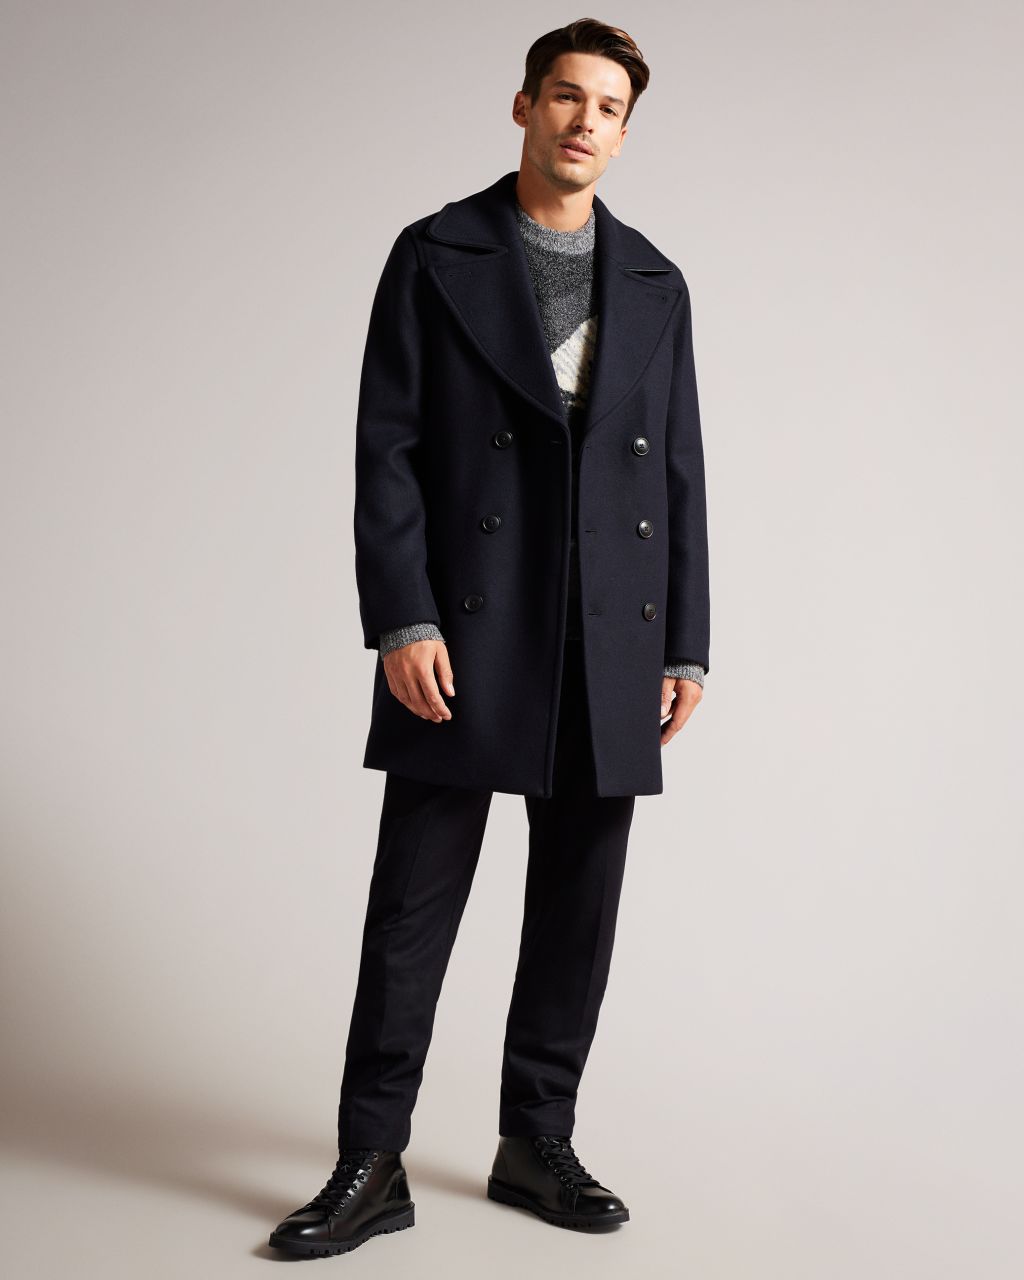 Ted Baker Men's Peacoat With Faux Leather Trim in Navy, Kilcot